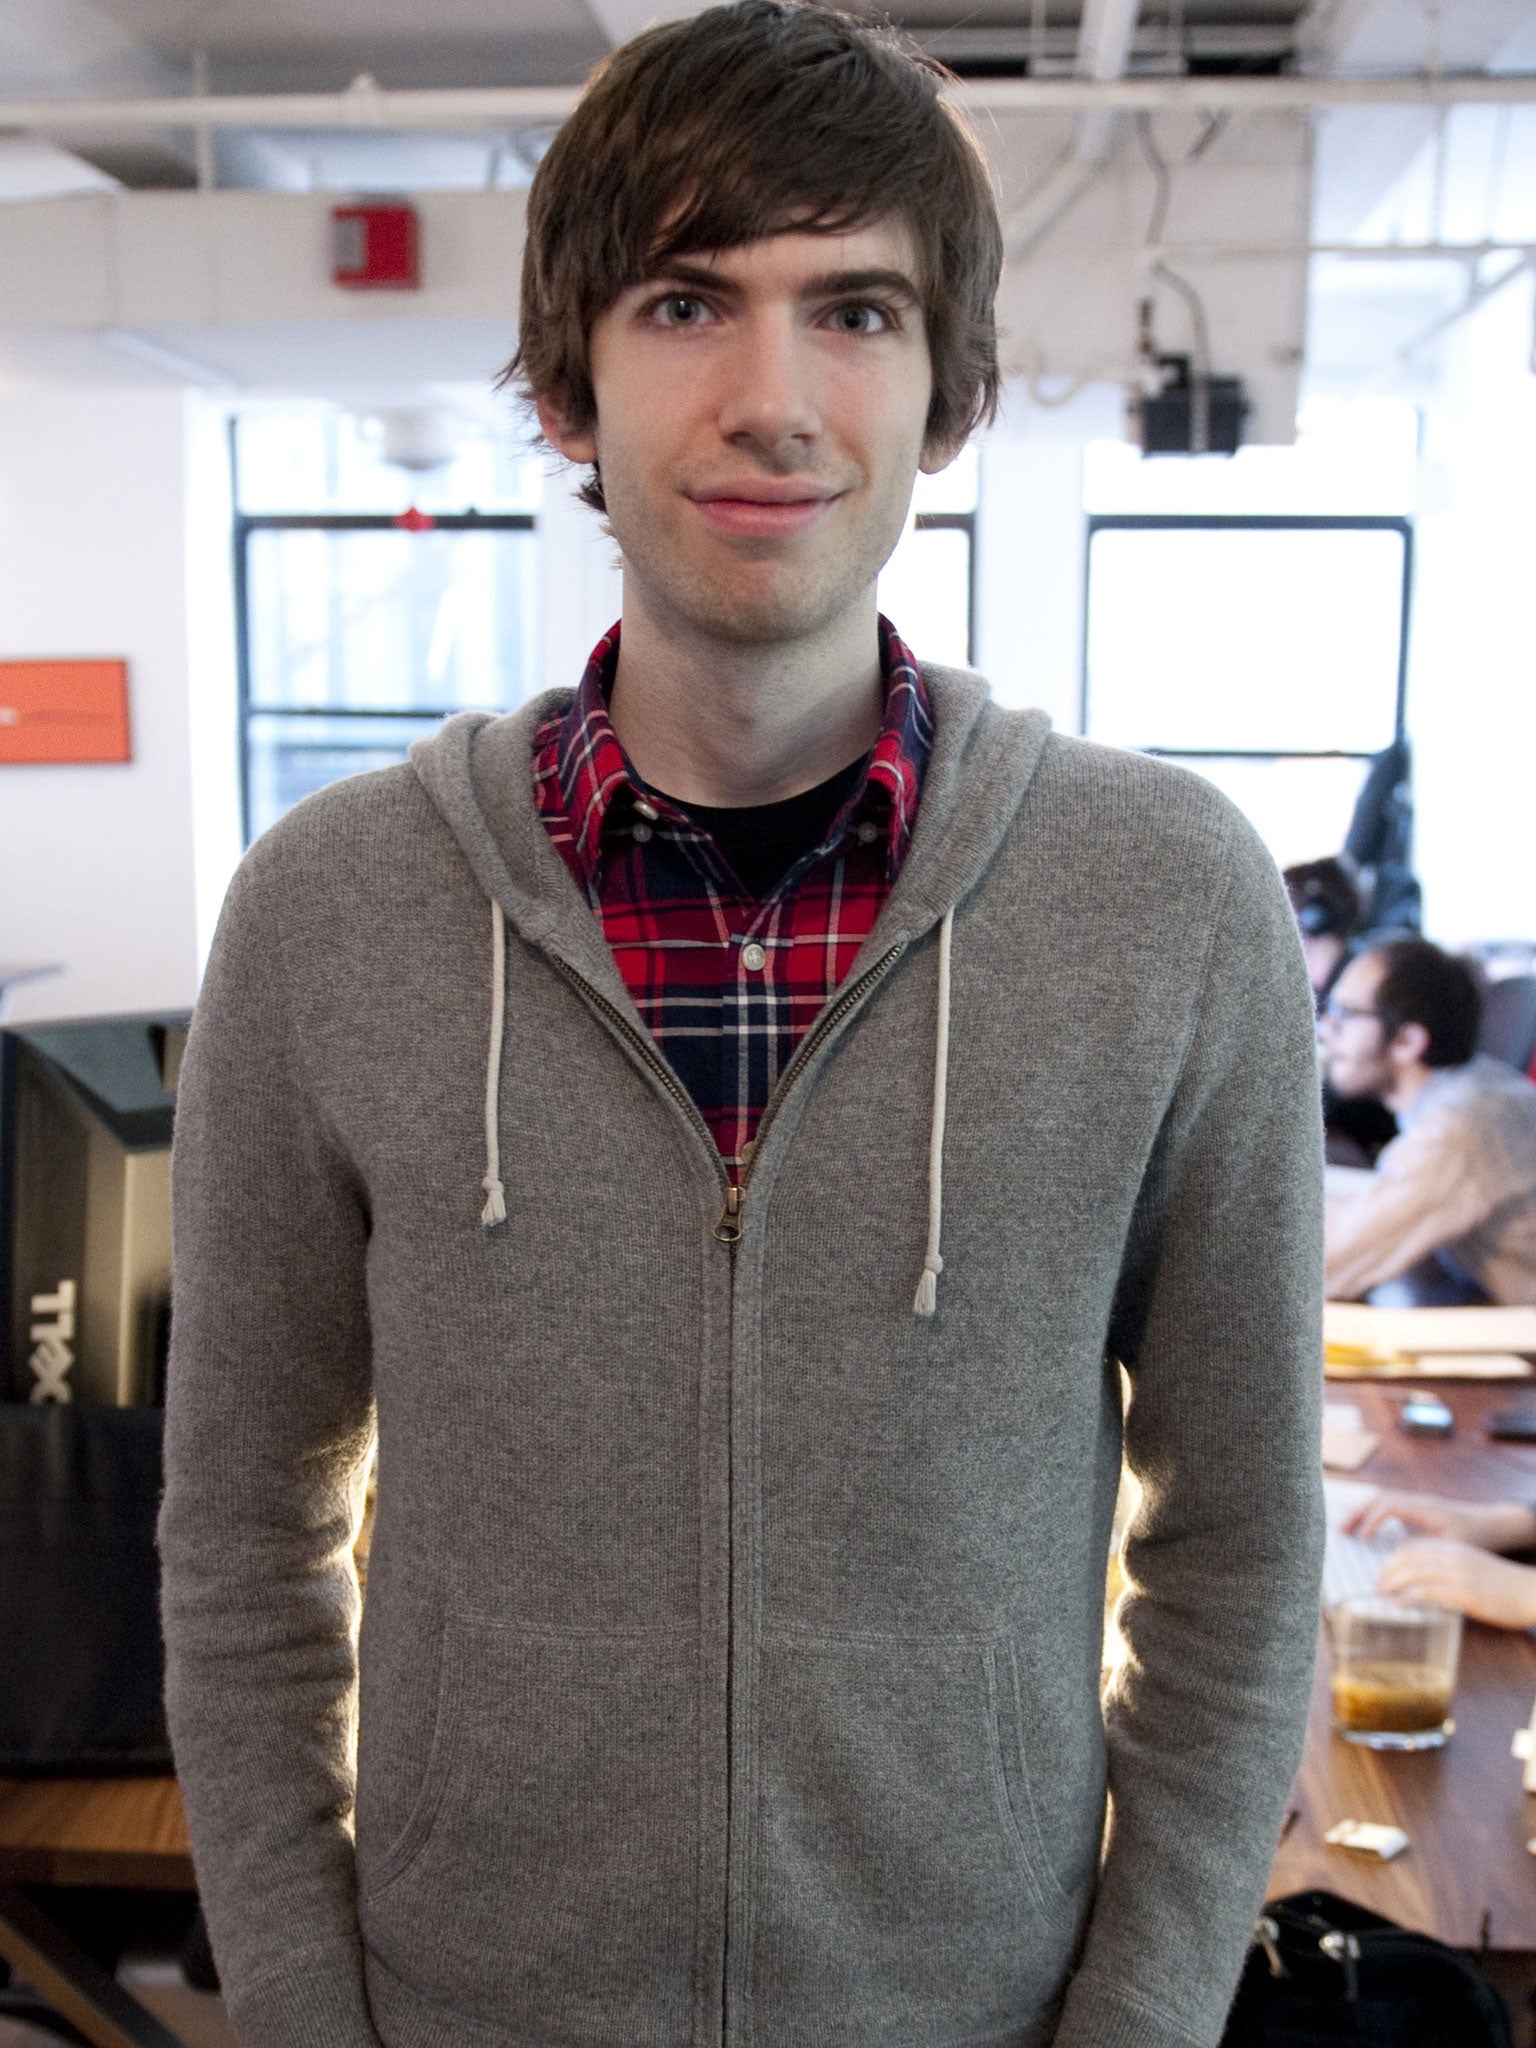 David Karp, the founder of Tumblr, will be the latest Silicon Valley tycoon